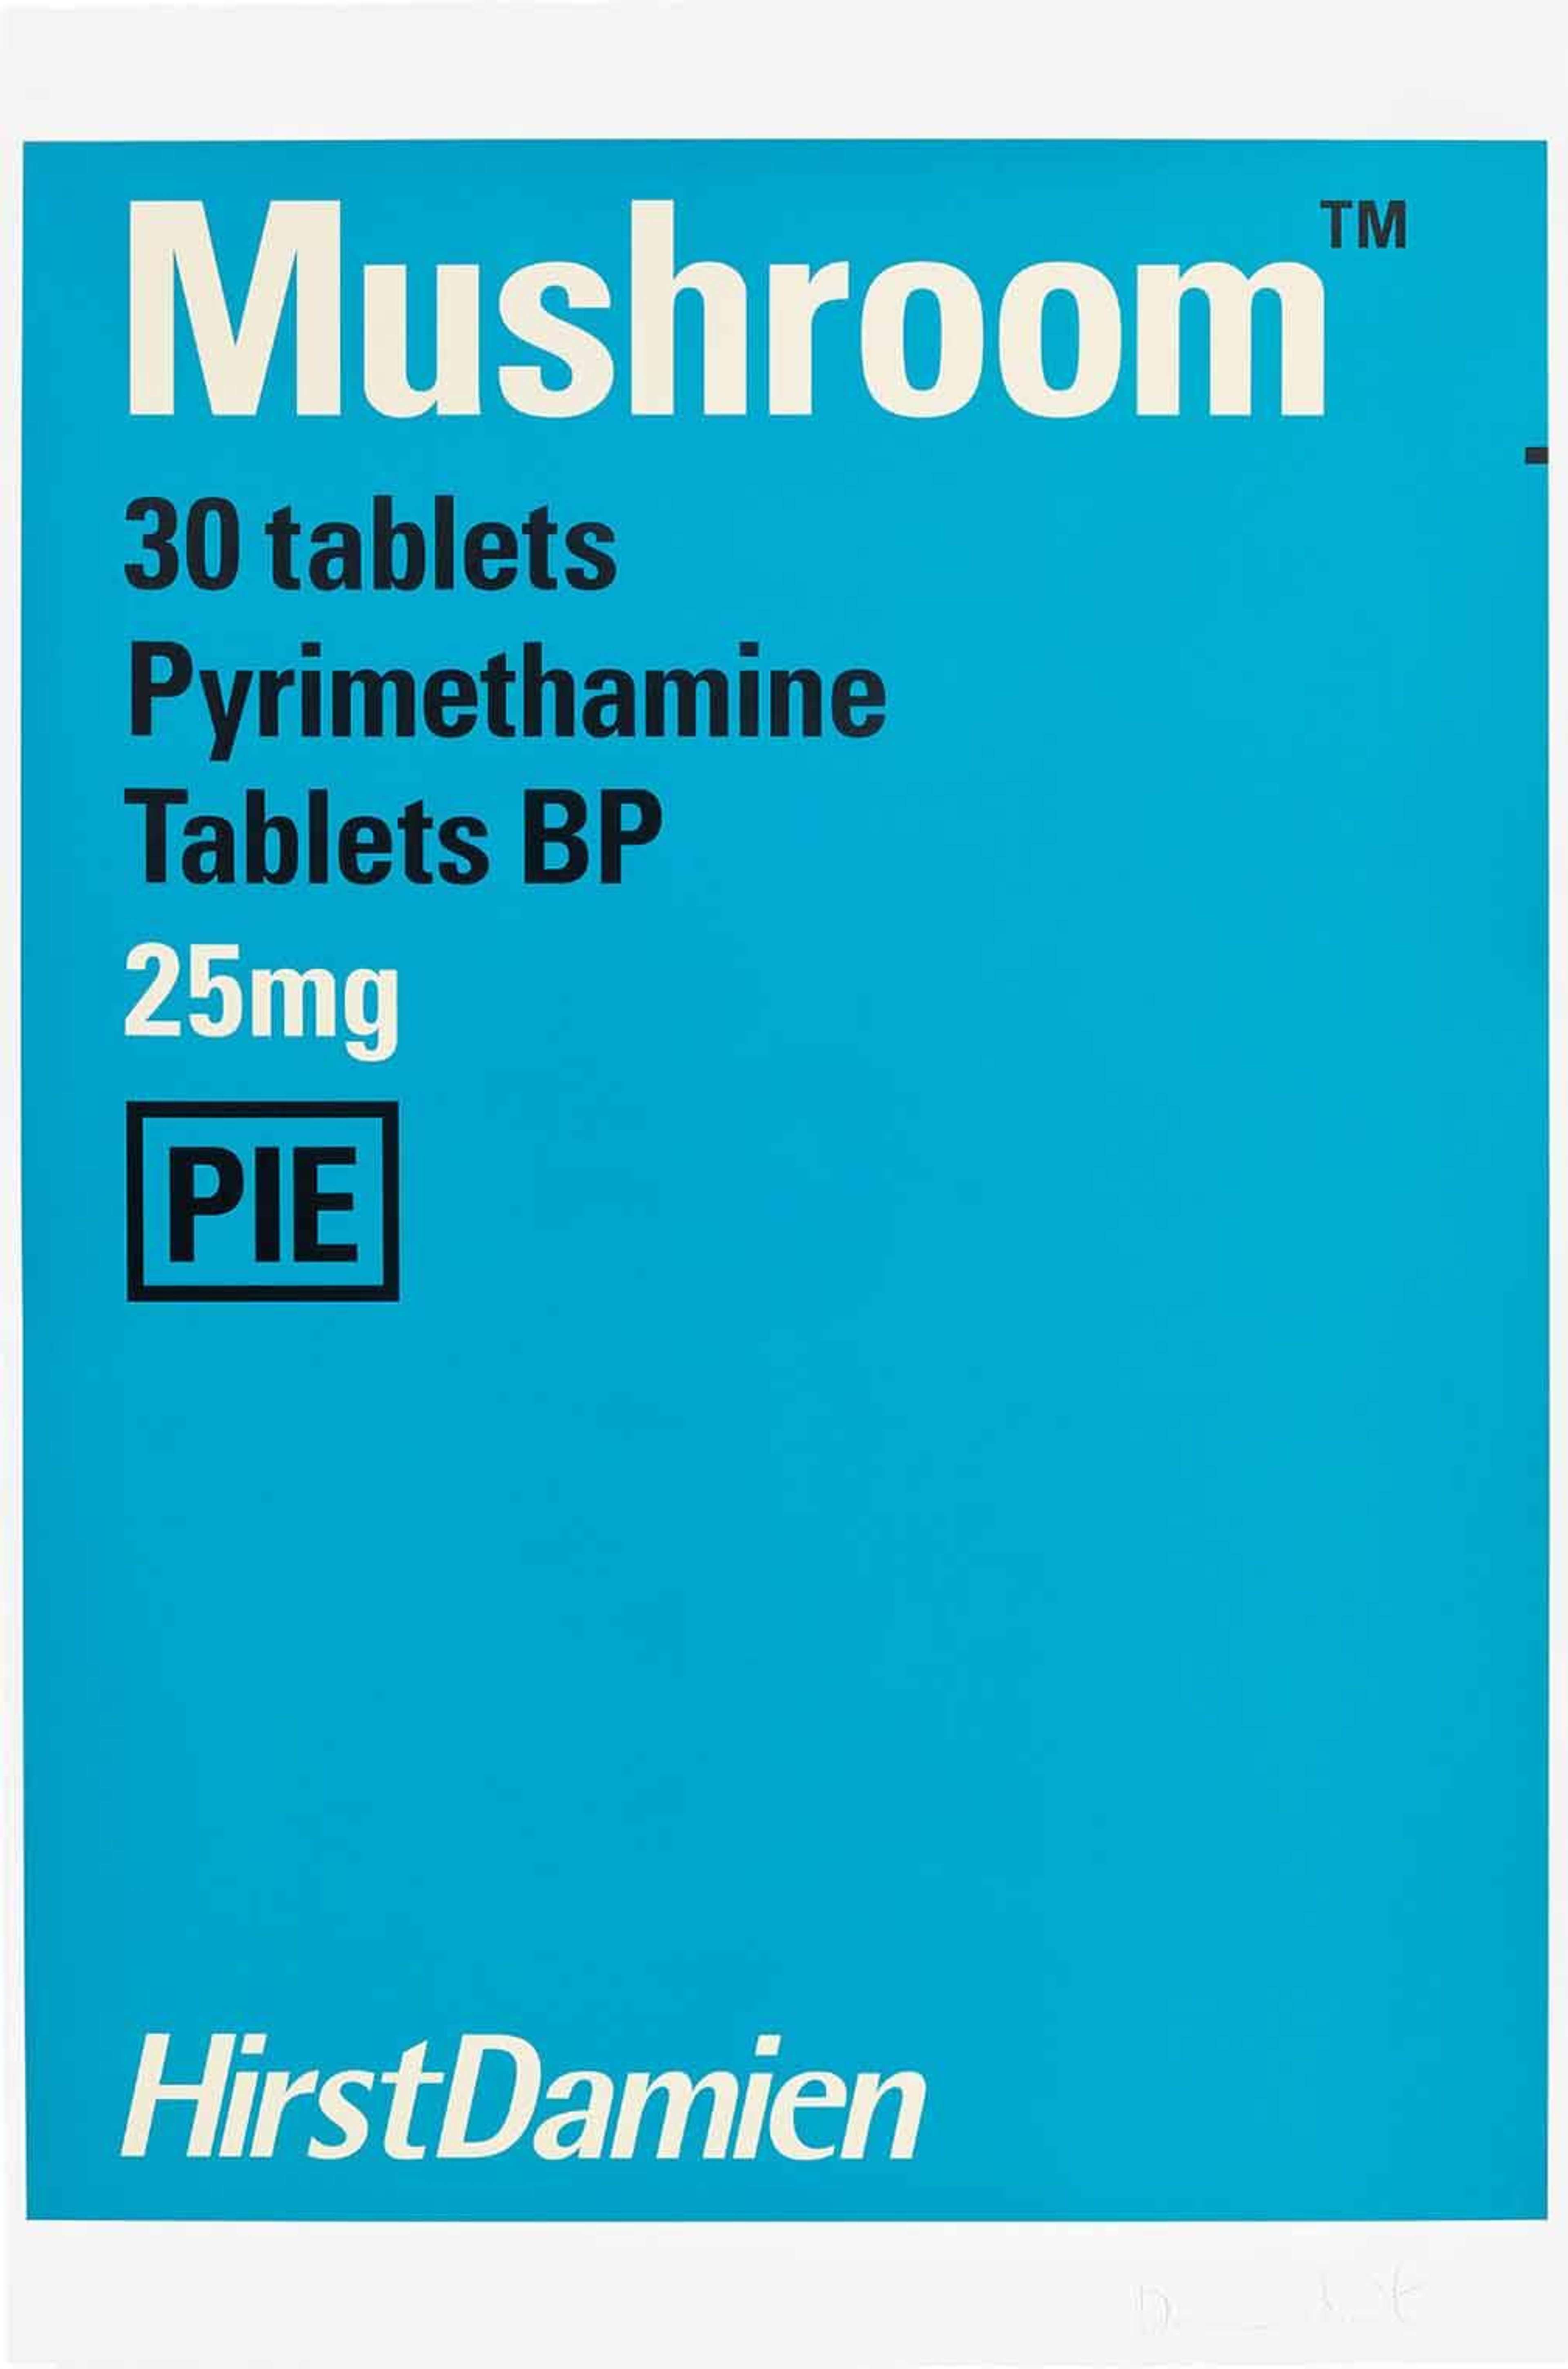 A screenprint by Damien Hirst depicting a mock pharmaceutical packaging in blue, containing the word ‘Mushroom’.